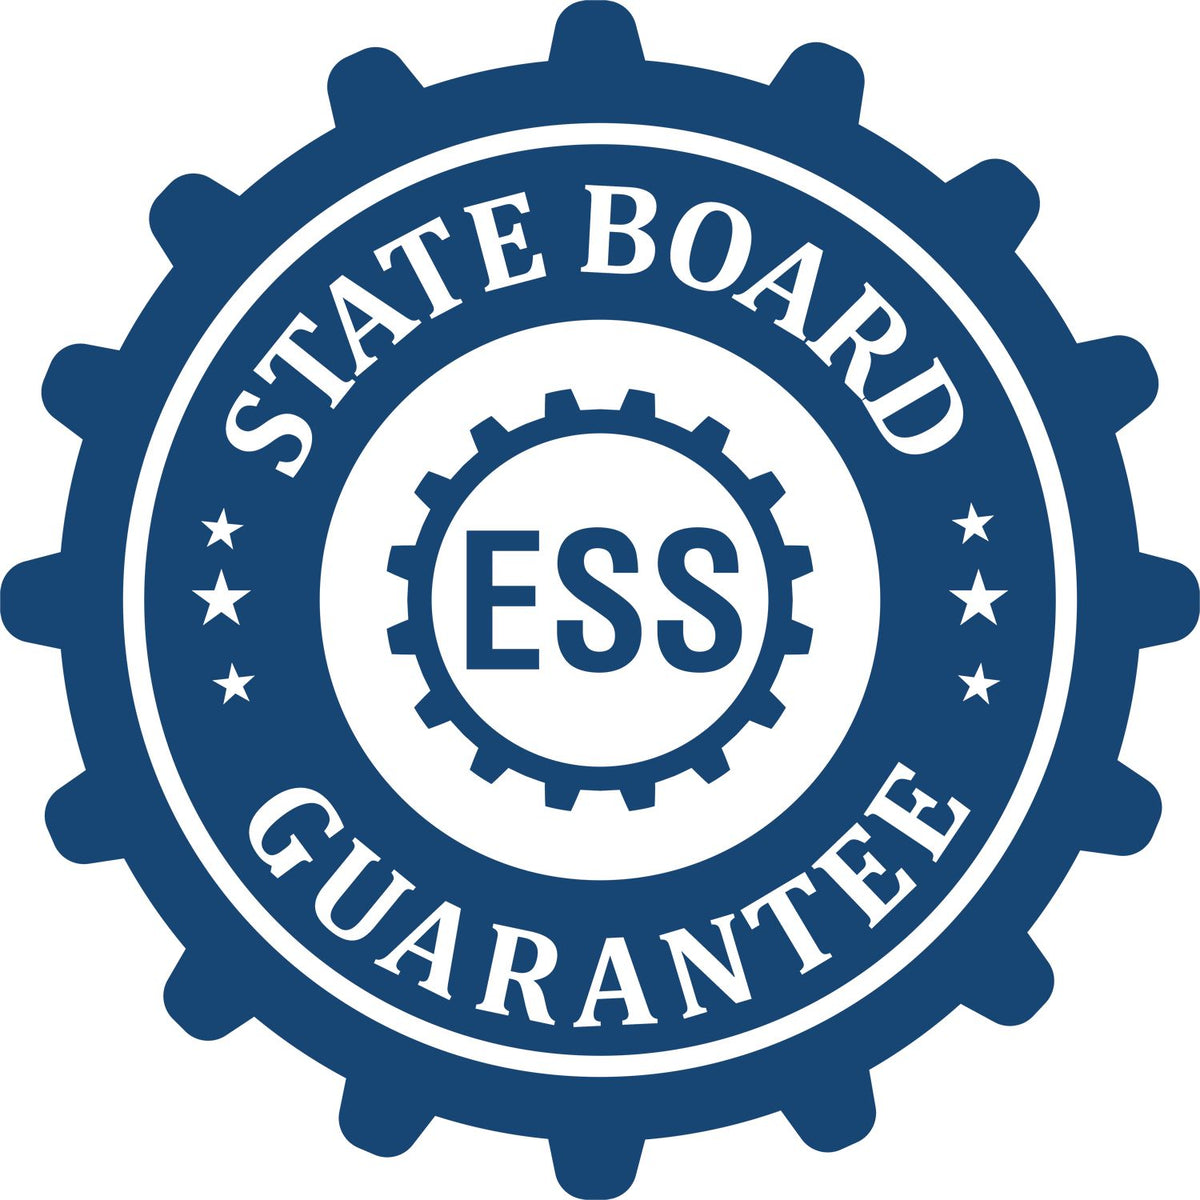 An emblem in a gear shape illustrating a state board guarantee for the Hybrid Maryland Geologist Seal